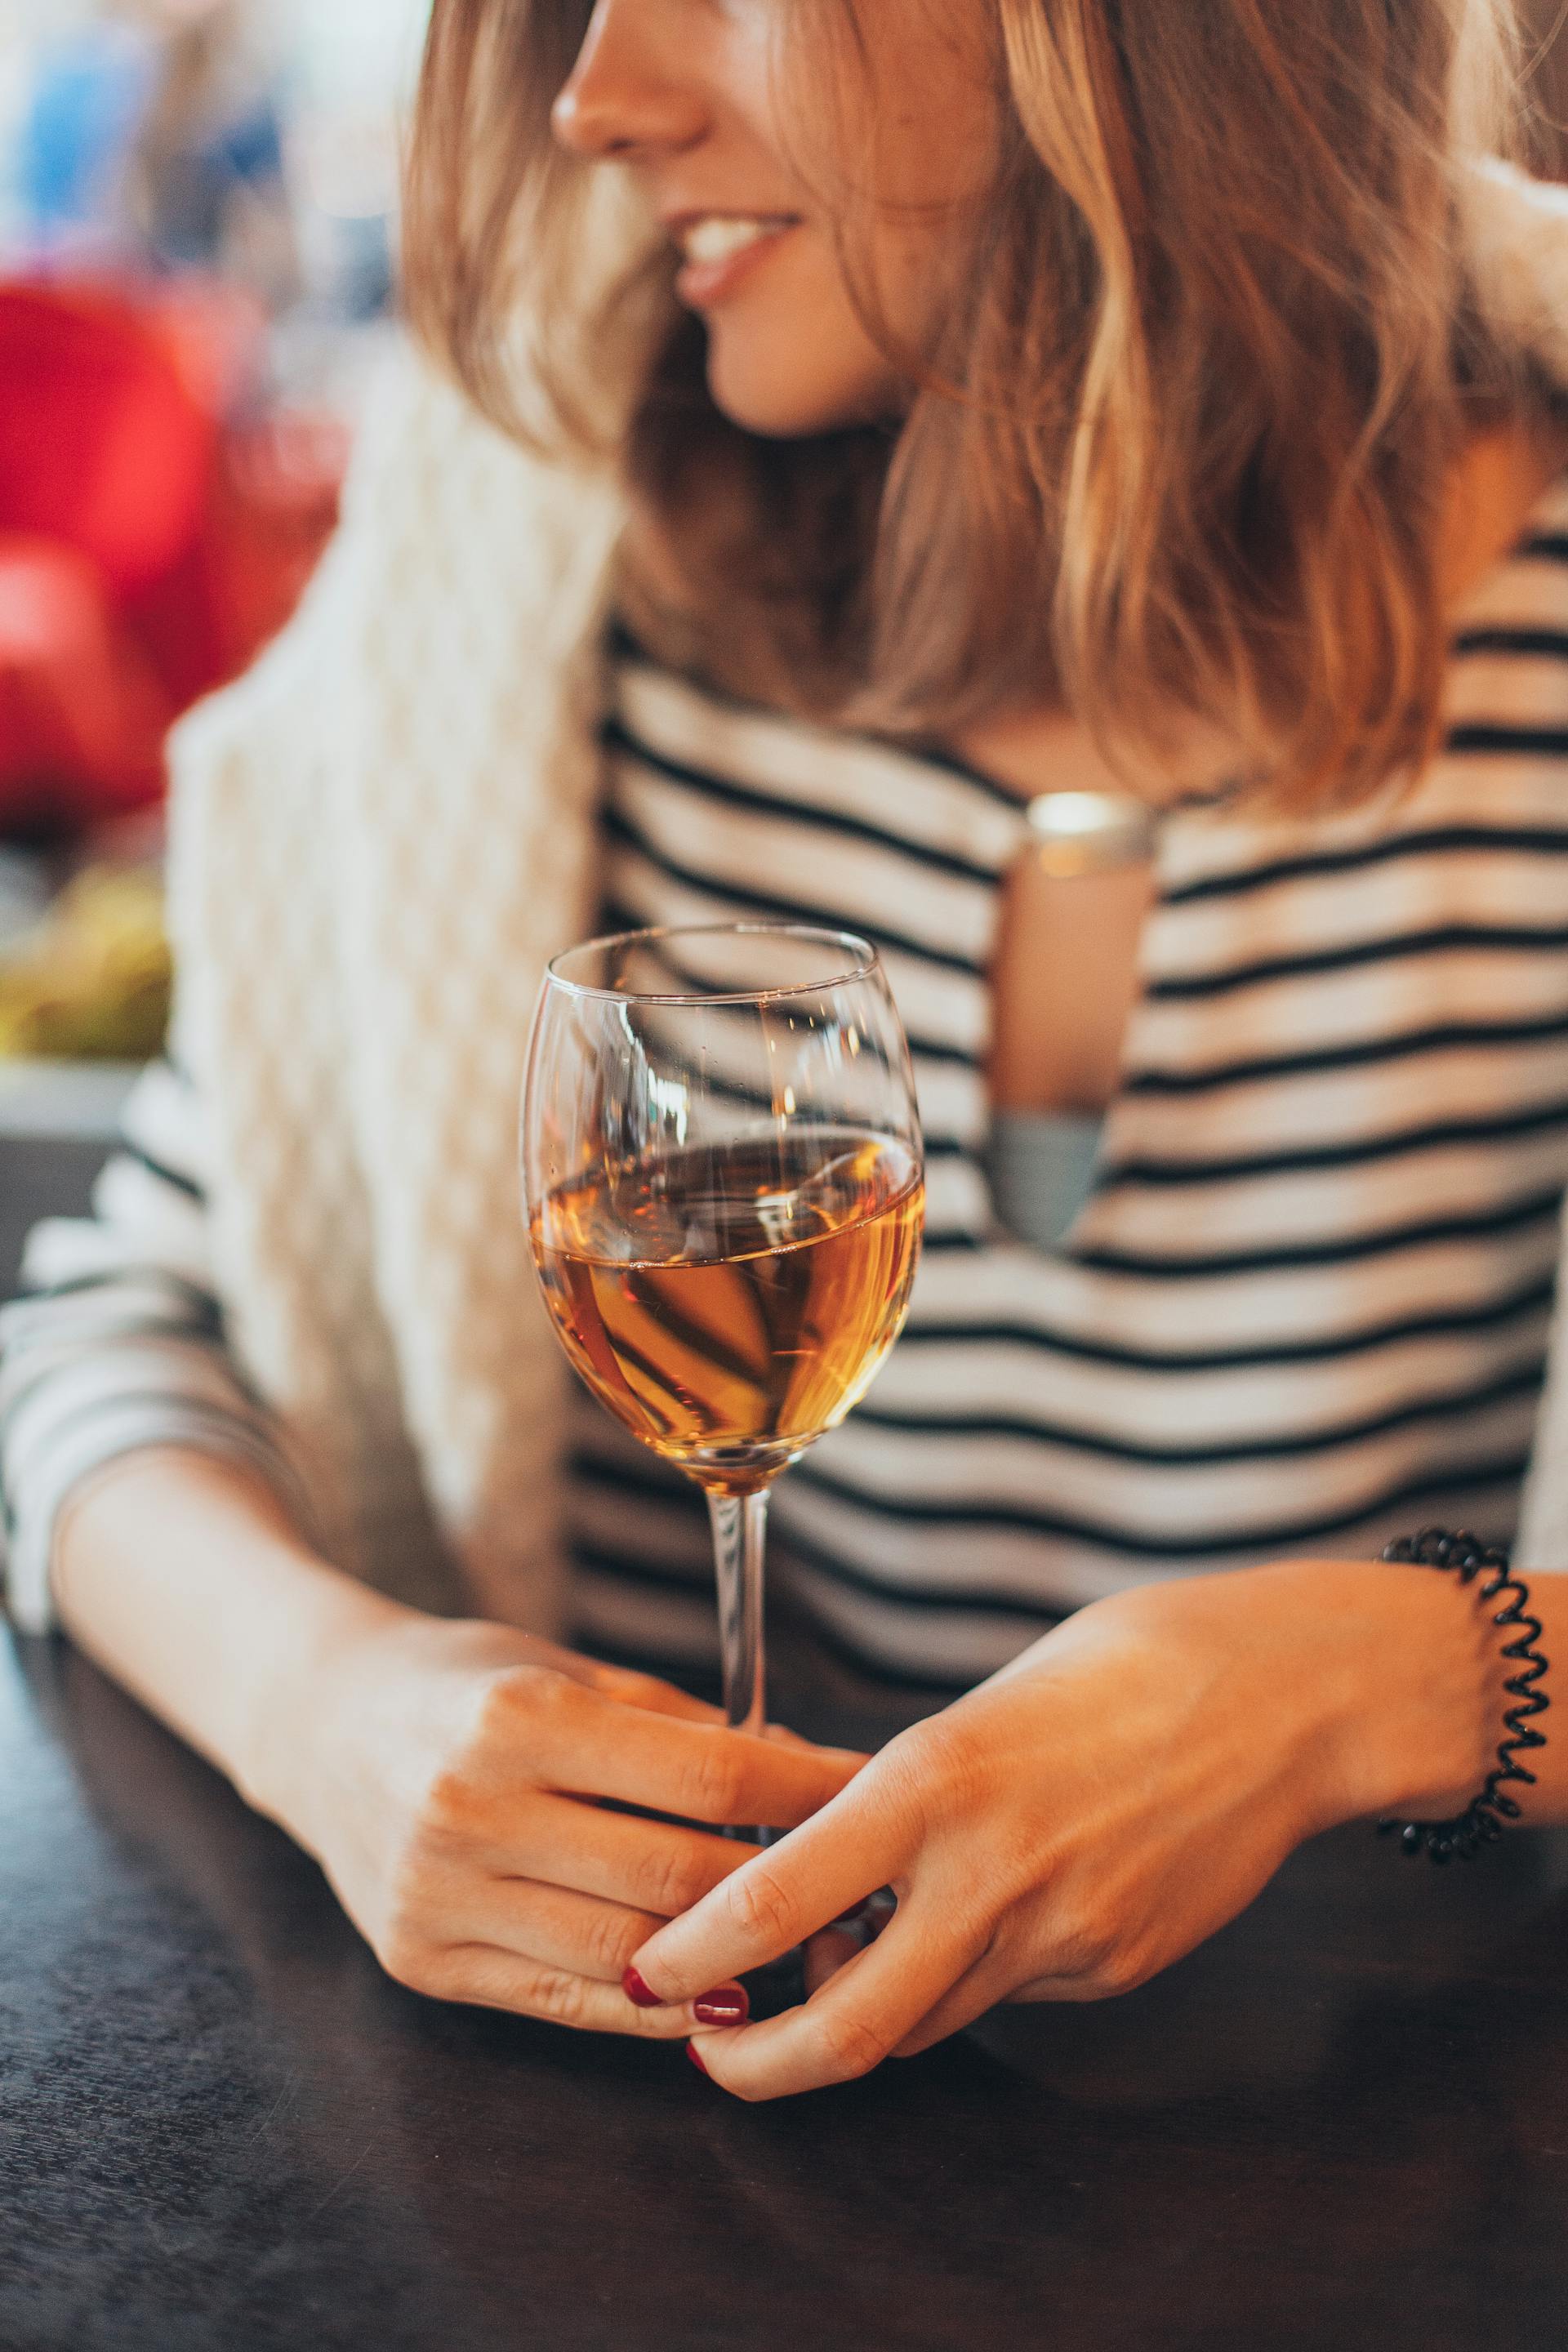 A woman holding a glass of wine | Source: Pexels